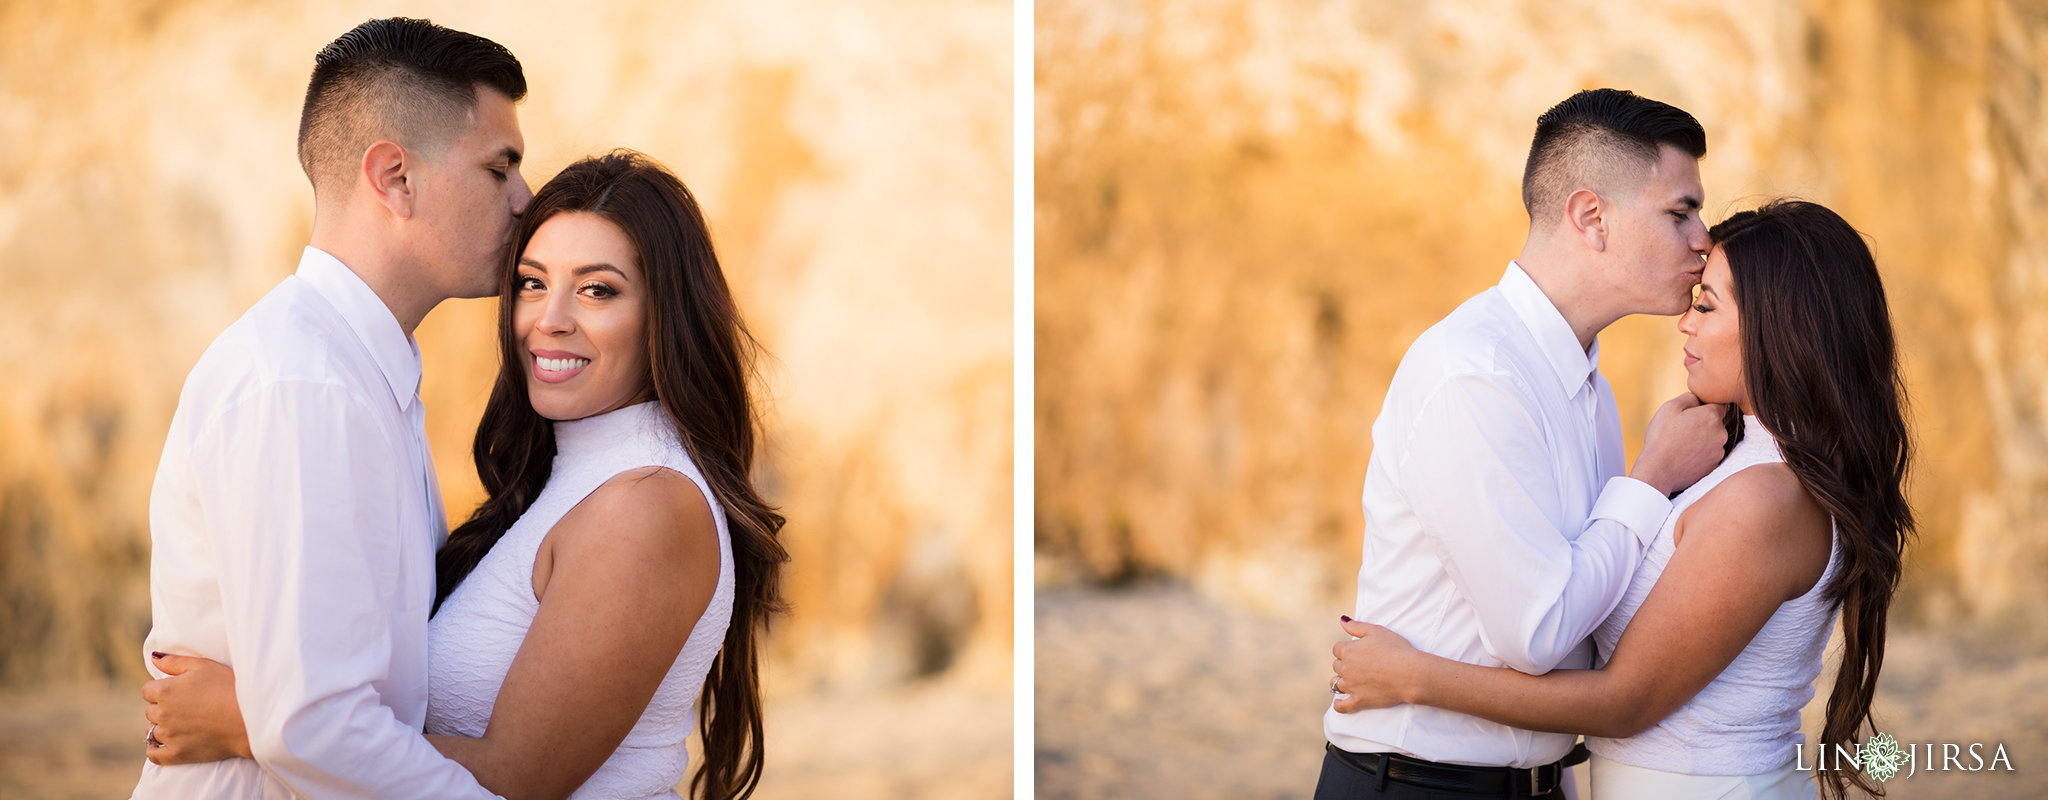 10-james-dilley-orange-county-beach-engagement-photography